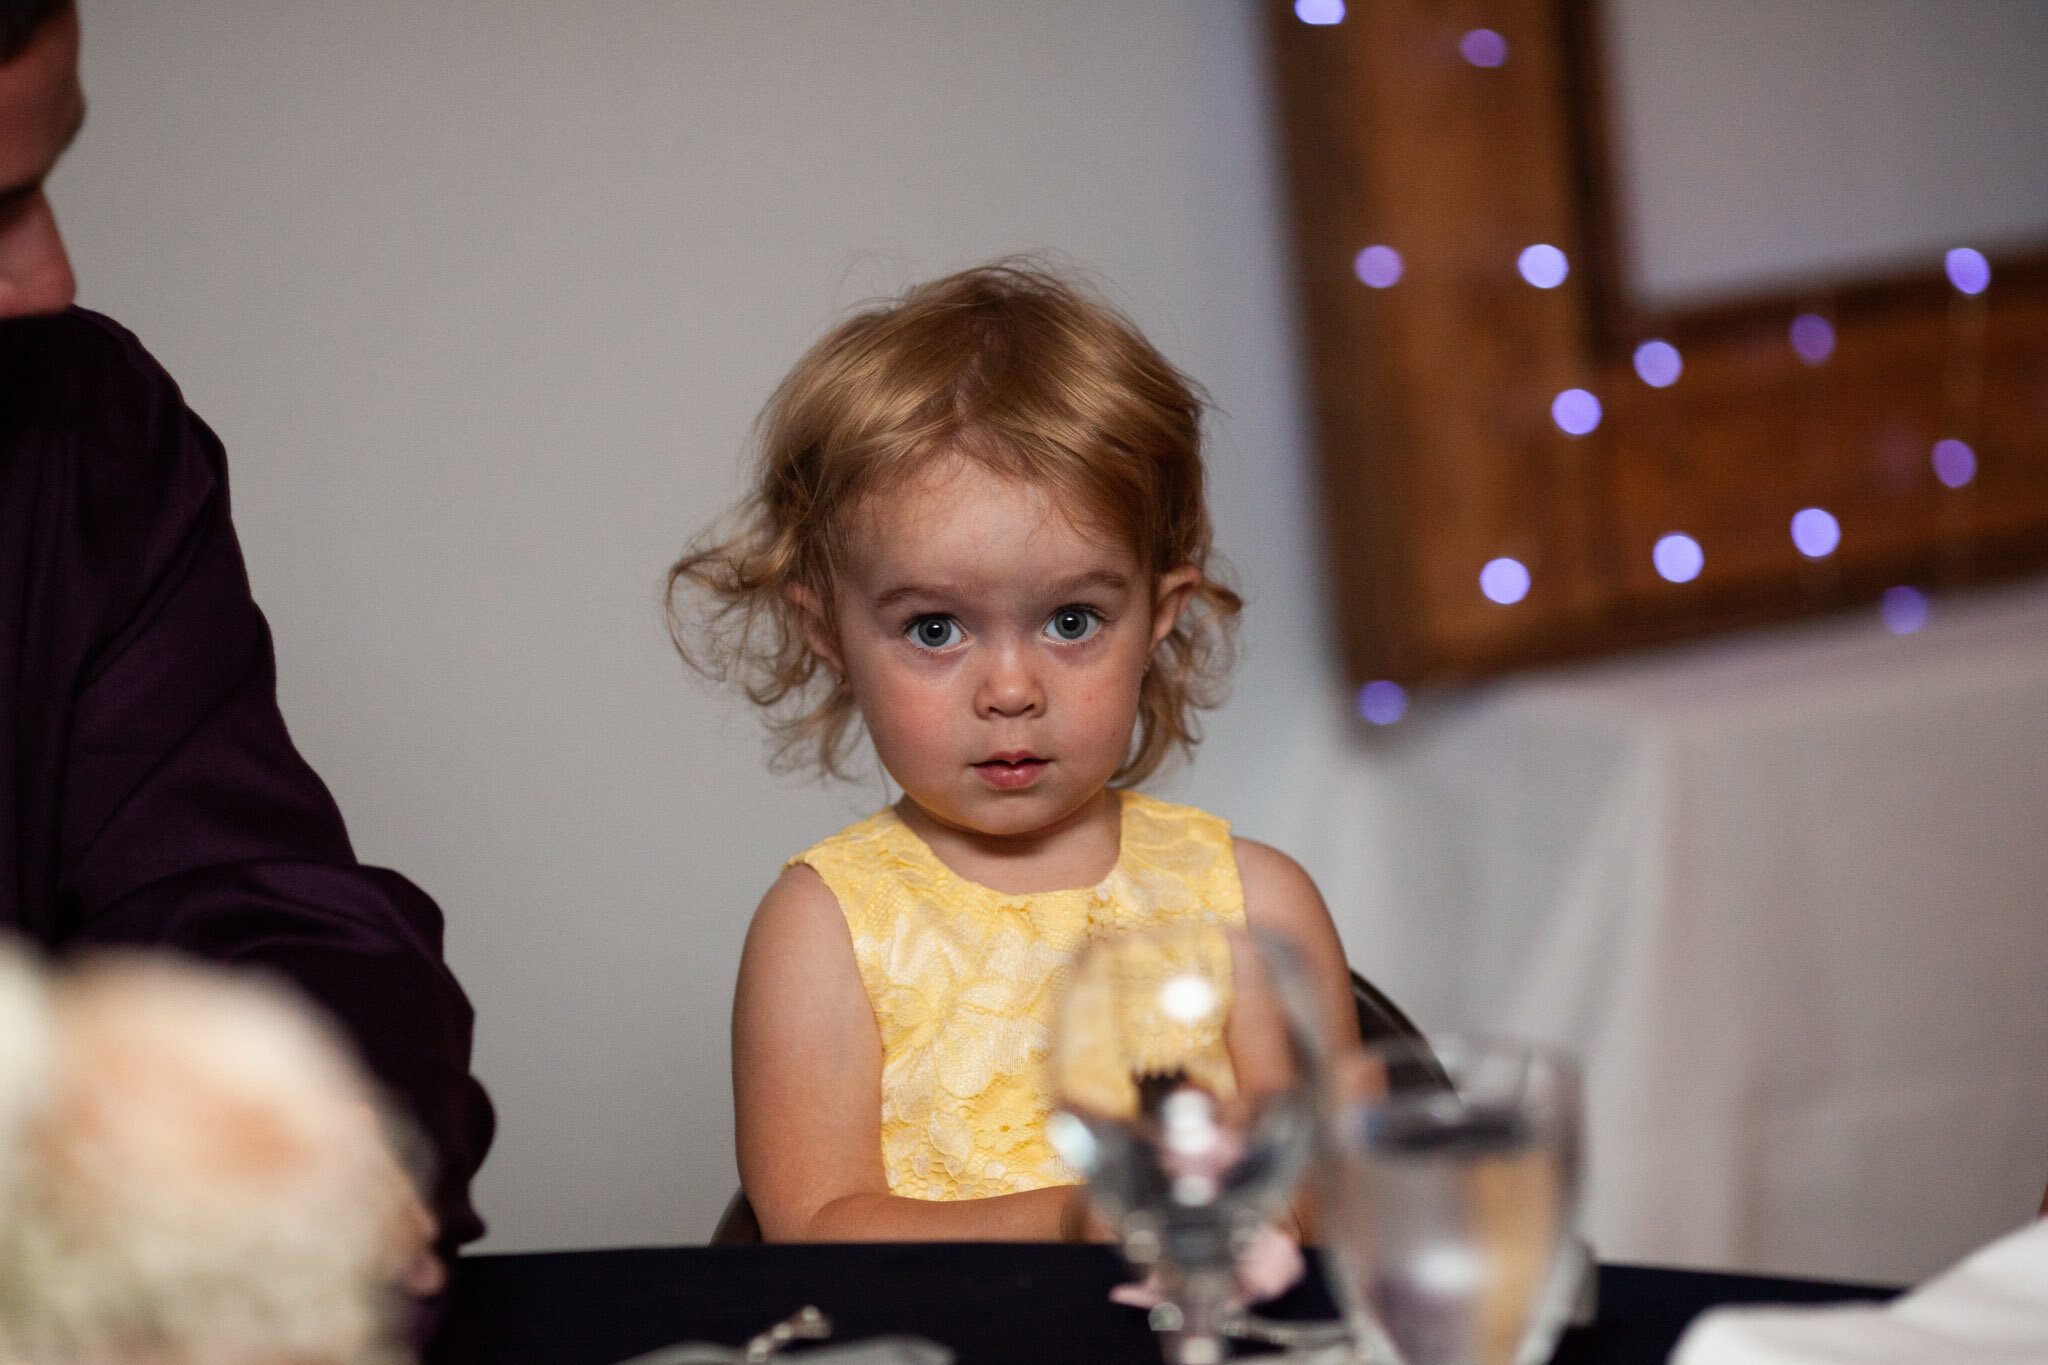 little girl in yellow dress wedding guest sitting at table.jpg